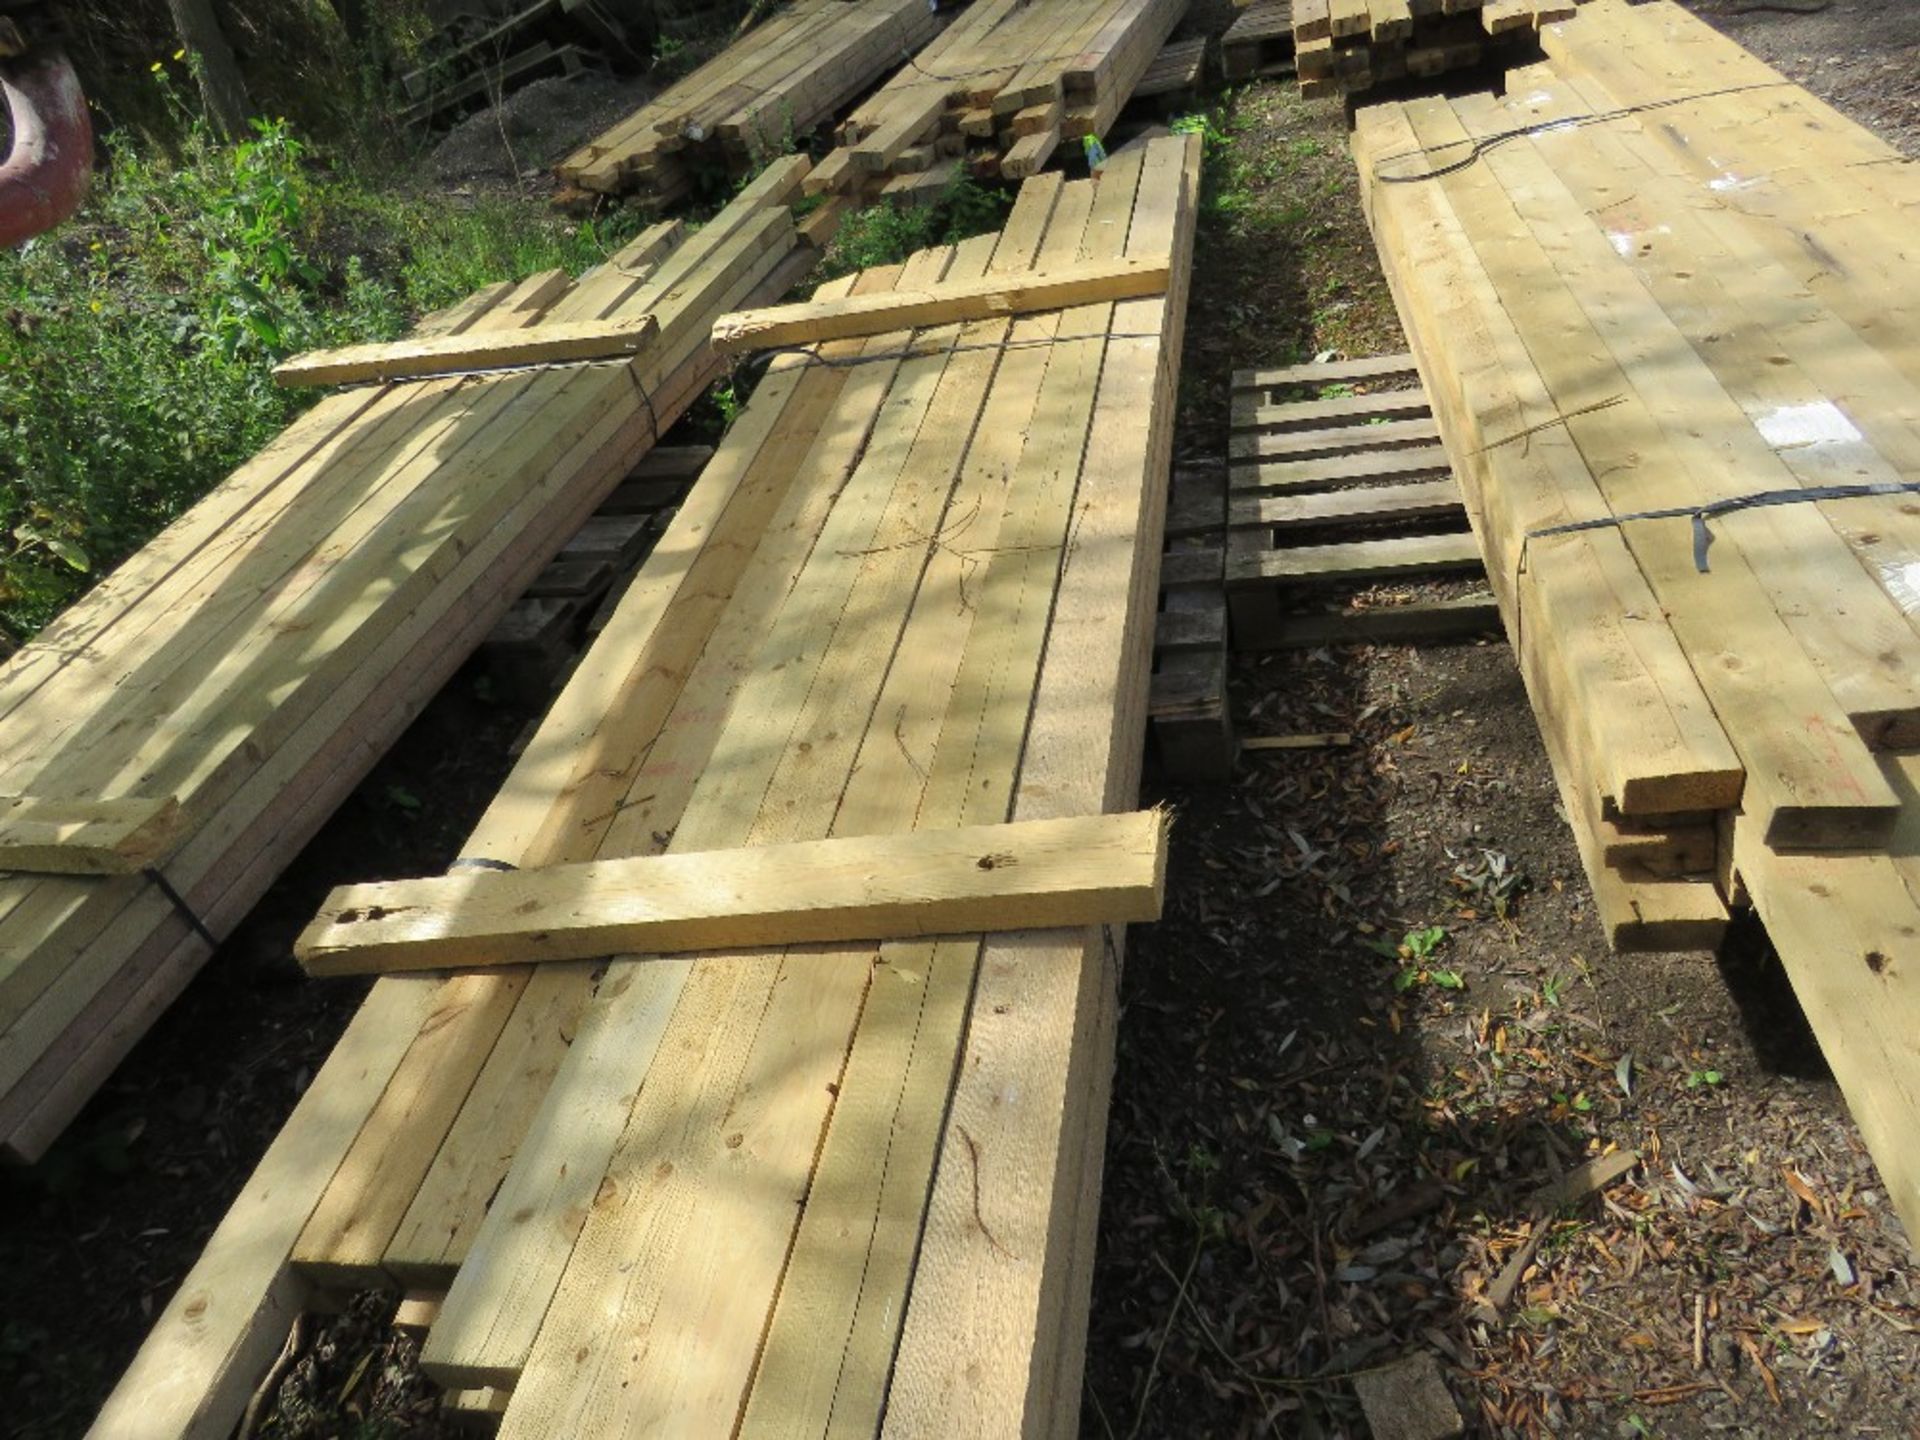 1 X BUNDLE OF PRE USED DE-NAILED 4X2 TIMBER, MAJORITY BEING 2.1-3M LENGTH. APPROX 32 IN EACH PACK. - Image 2 of 2